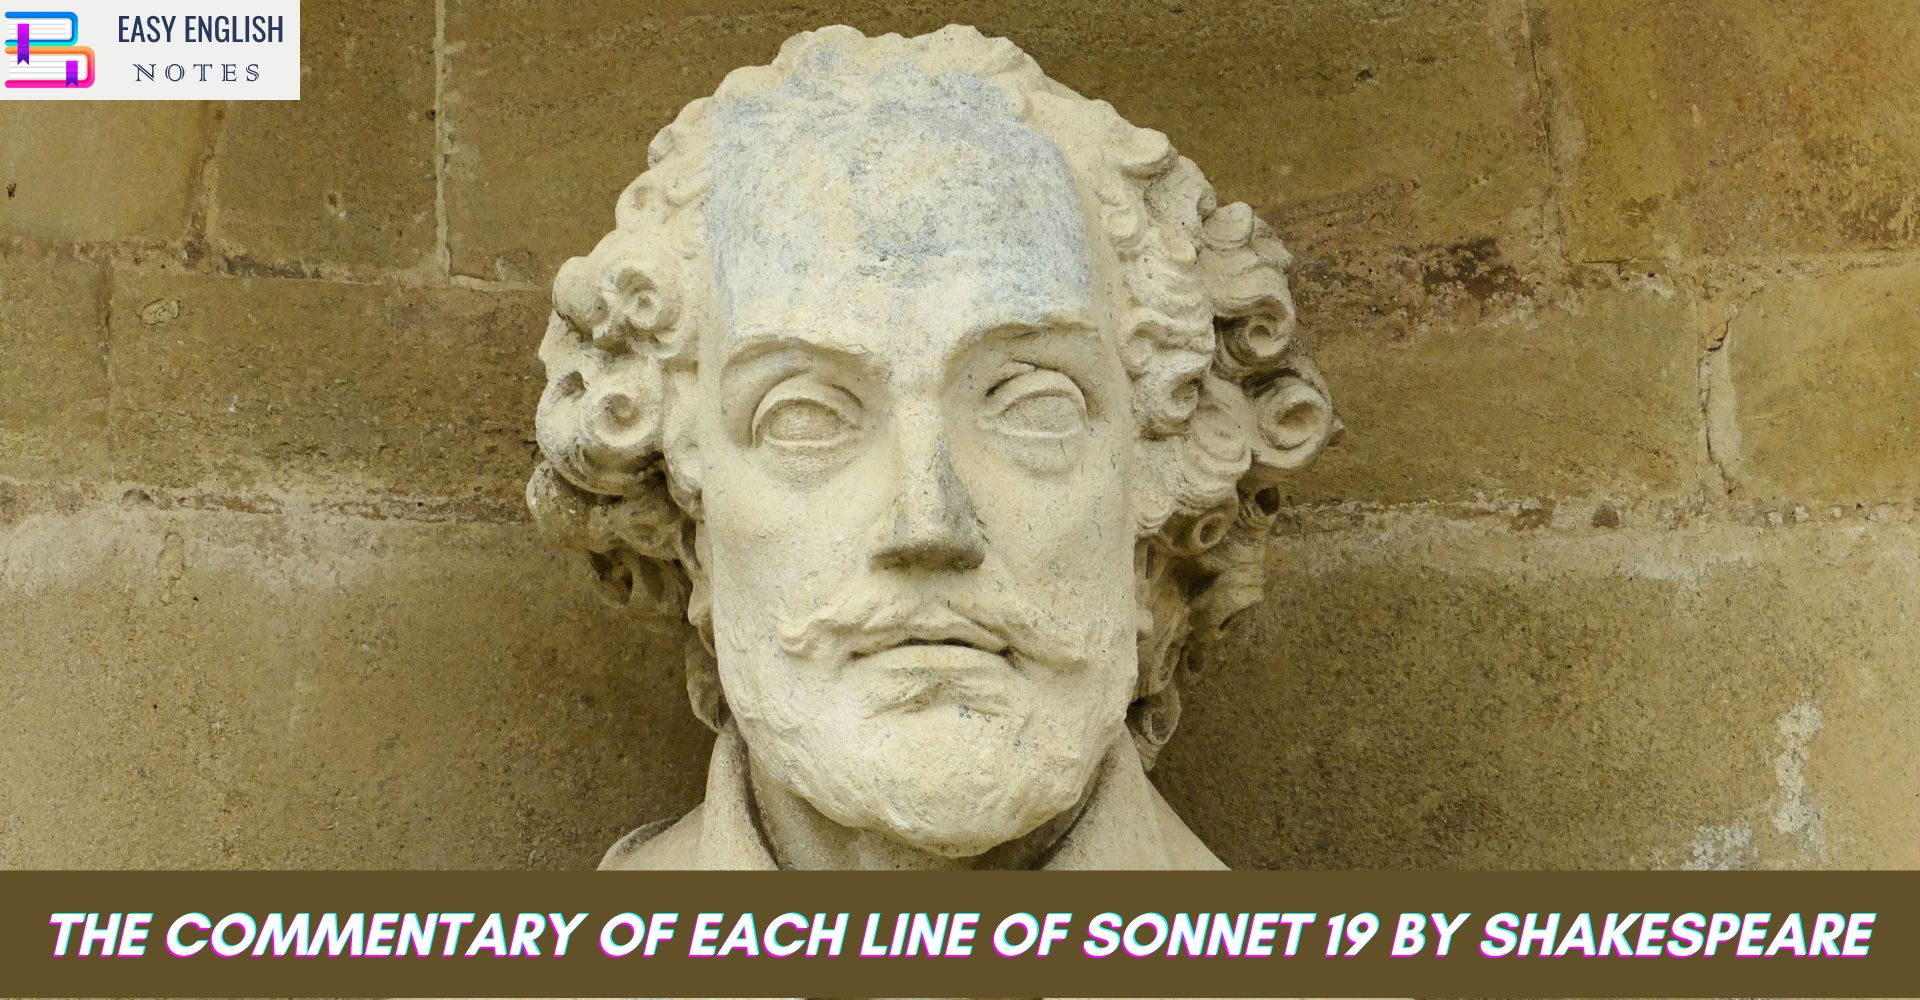 The Commentary of Each Line of Sonnet 19 by Shakespeare